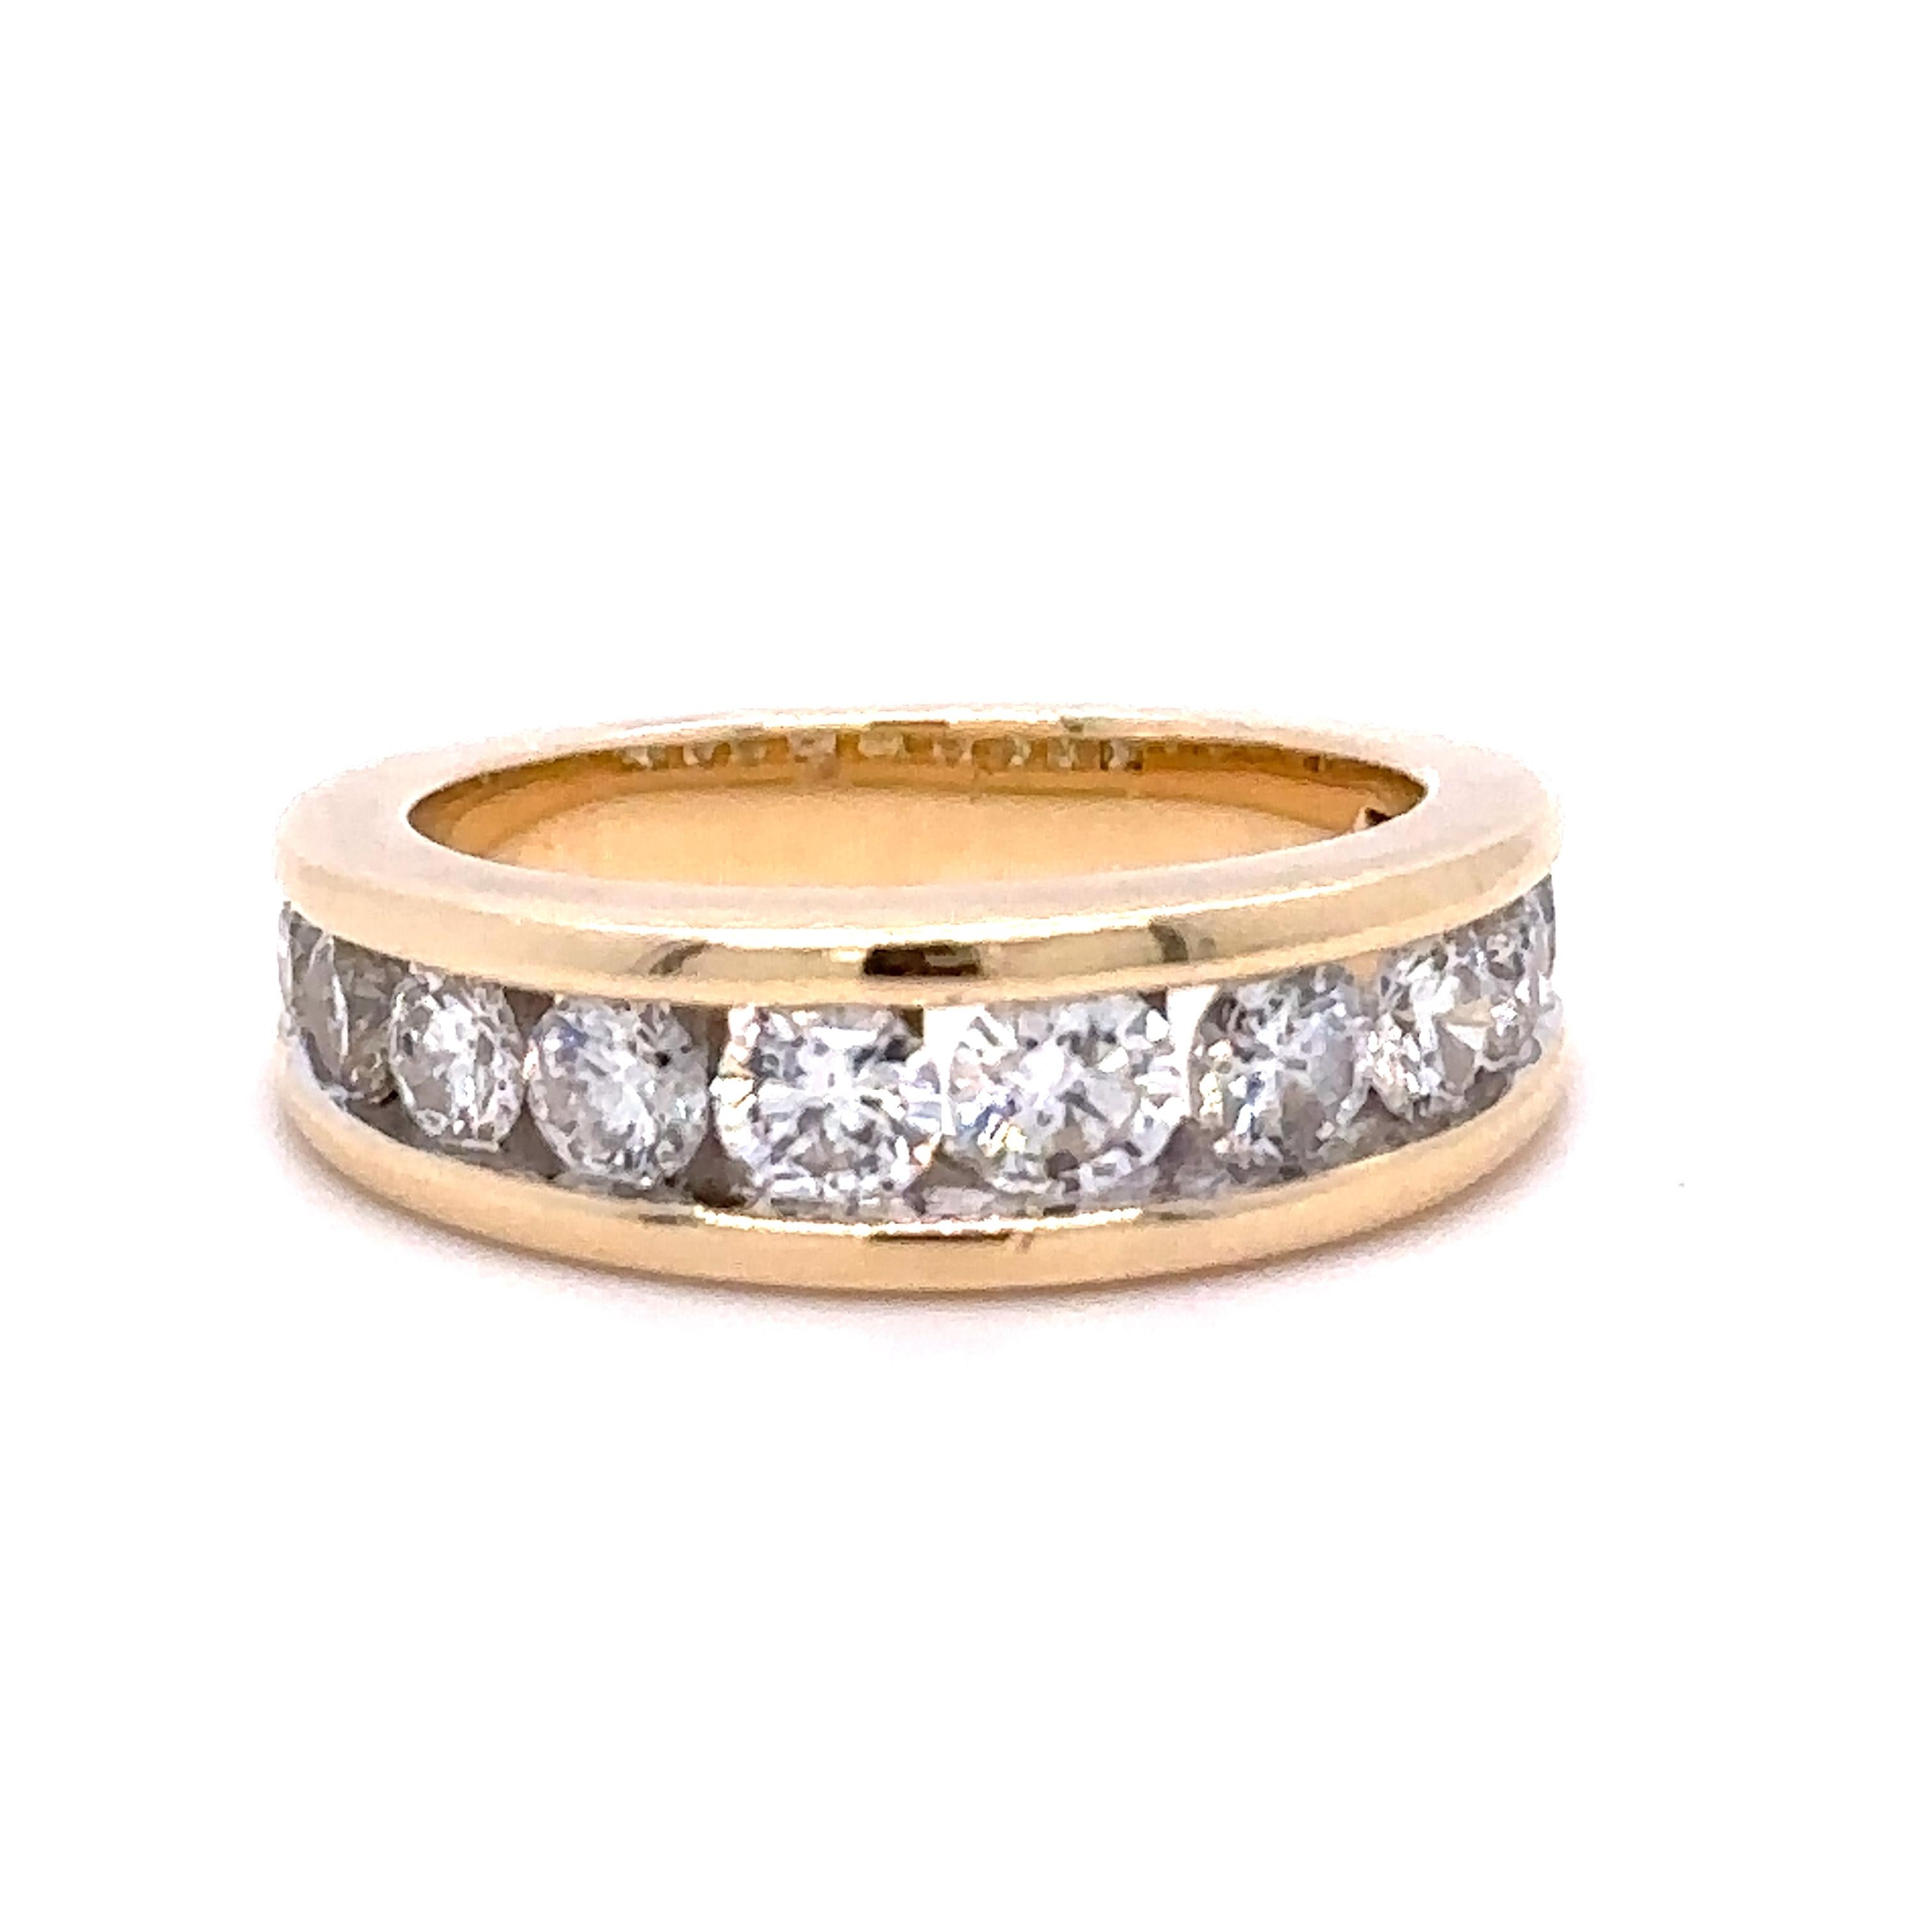 A diamond Ring, made of 14ct Yellow Gold, and weighing 5.12 gm. Stamped: 585.

Set with 11 round, brilliant cut Diamonds, colour G and clarity SI-I. with a total weight of 1.30ct.
Metal: 14ct Yellow Gold
Carat: 1.30ct
Colour: G
Clarity: SI-I
Cut: